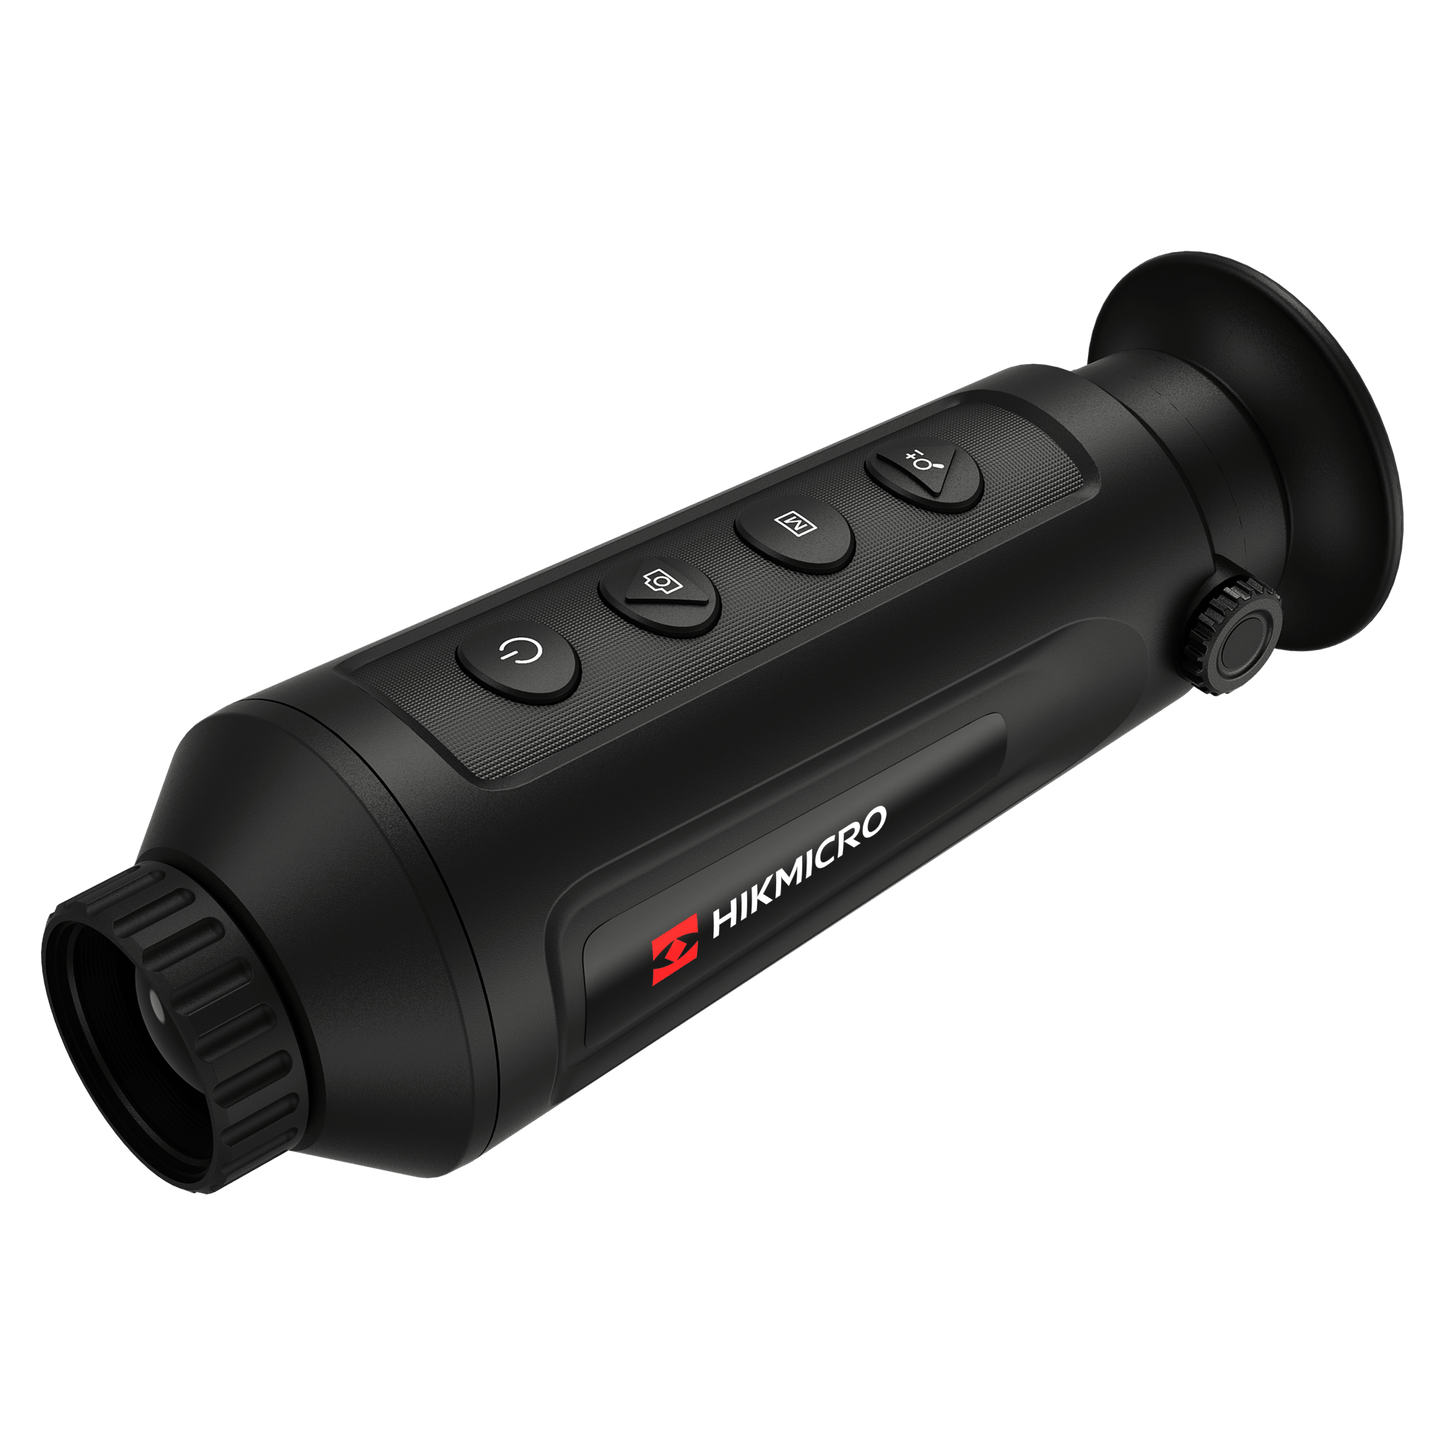 Cape Thermal - The best thermal imaging monoculars for sale - HikMicro LYNX Pro LH19 Handheld thermal imaging monocular - Left Side View